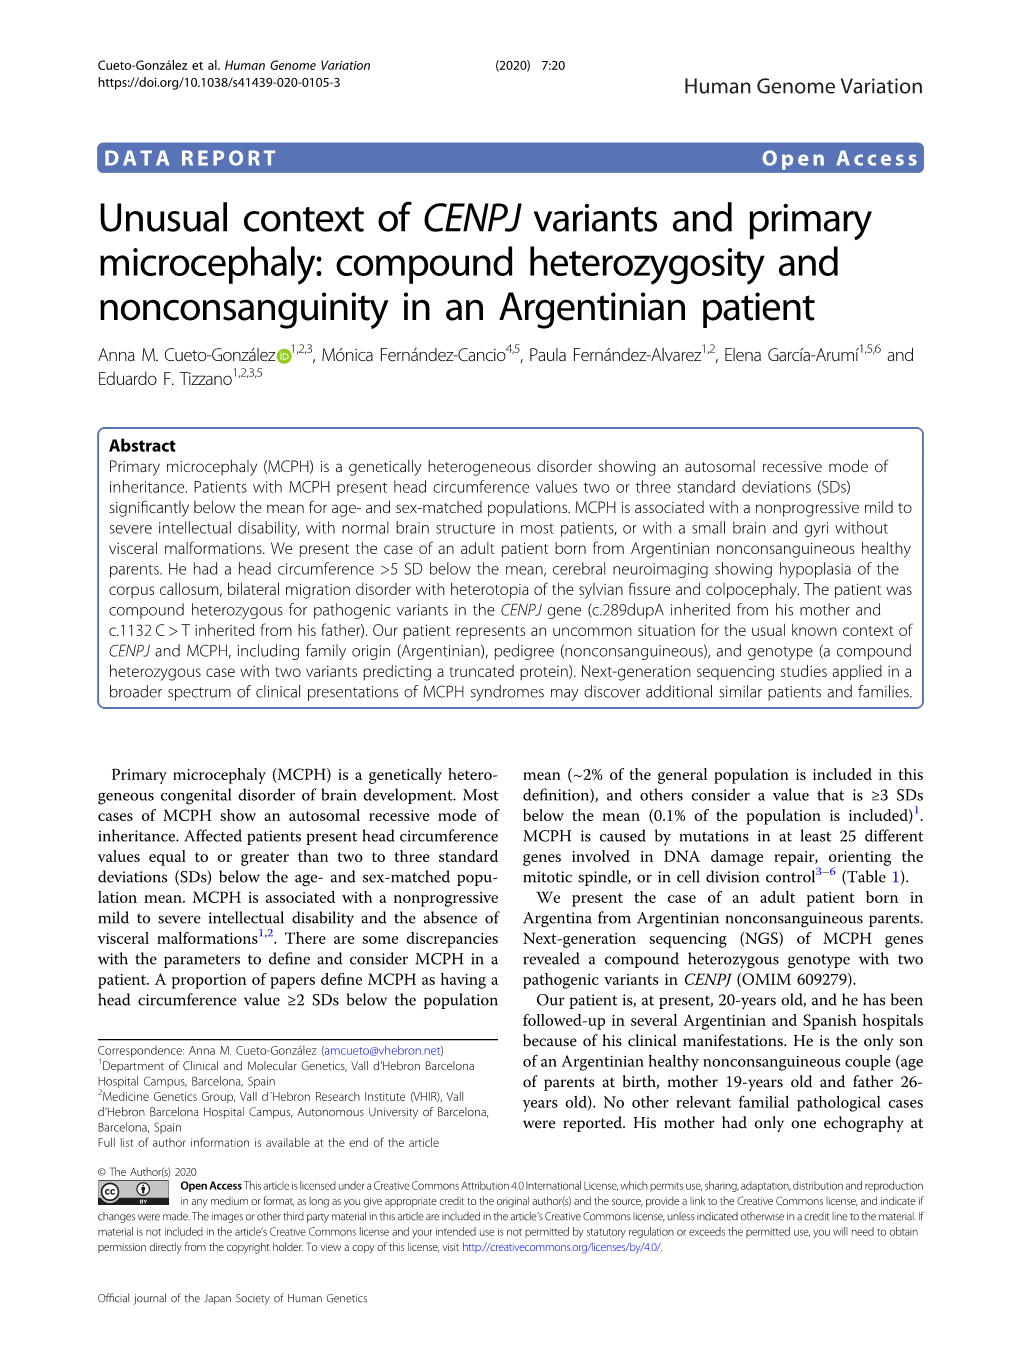 Unusual Context of CENPJ Variants and Primary Microcephaly: Compound Heterozygosity and Nonconsanguinity in an Argentinian Patient Anna M